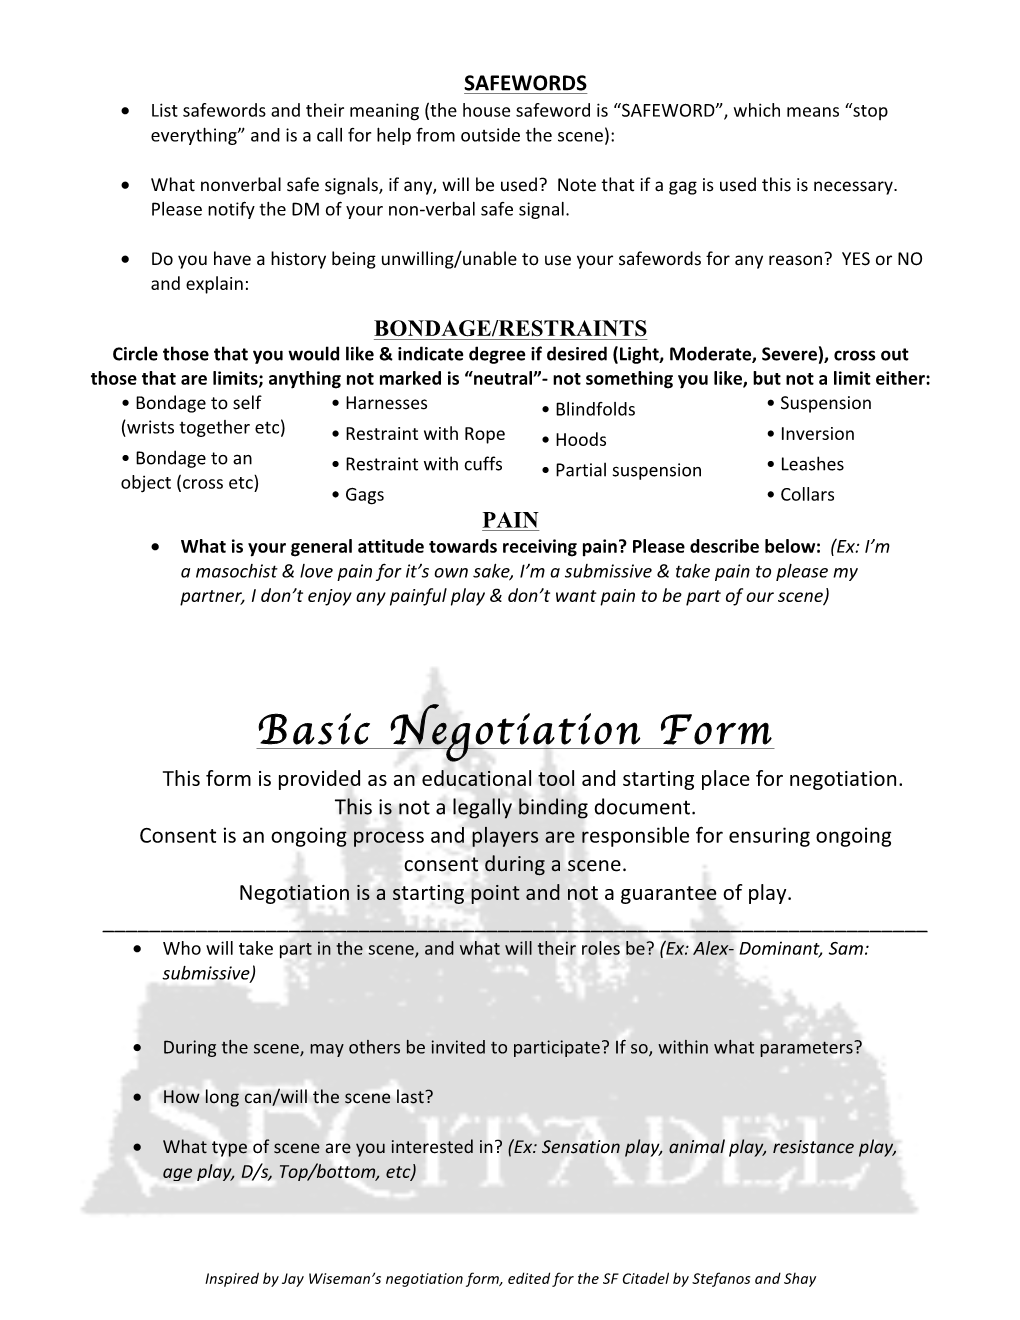 Basic Negotiation Form This Form Is Provided As an Educational Tool and Starting Place for Negotiation